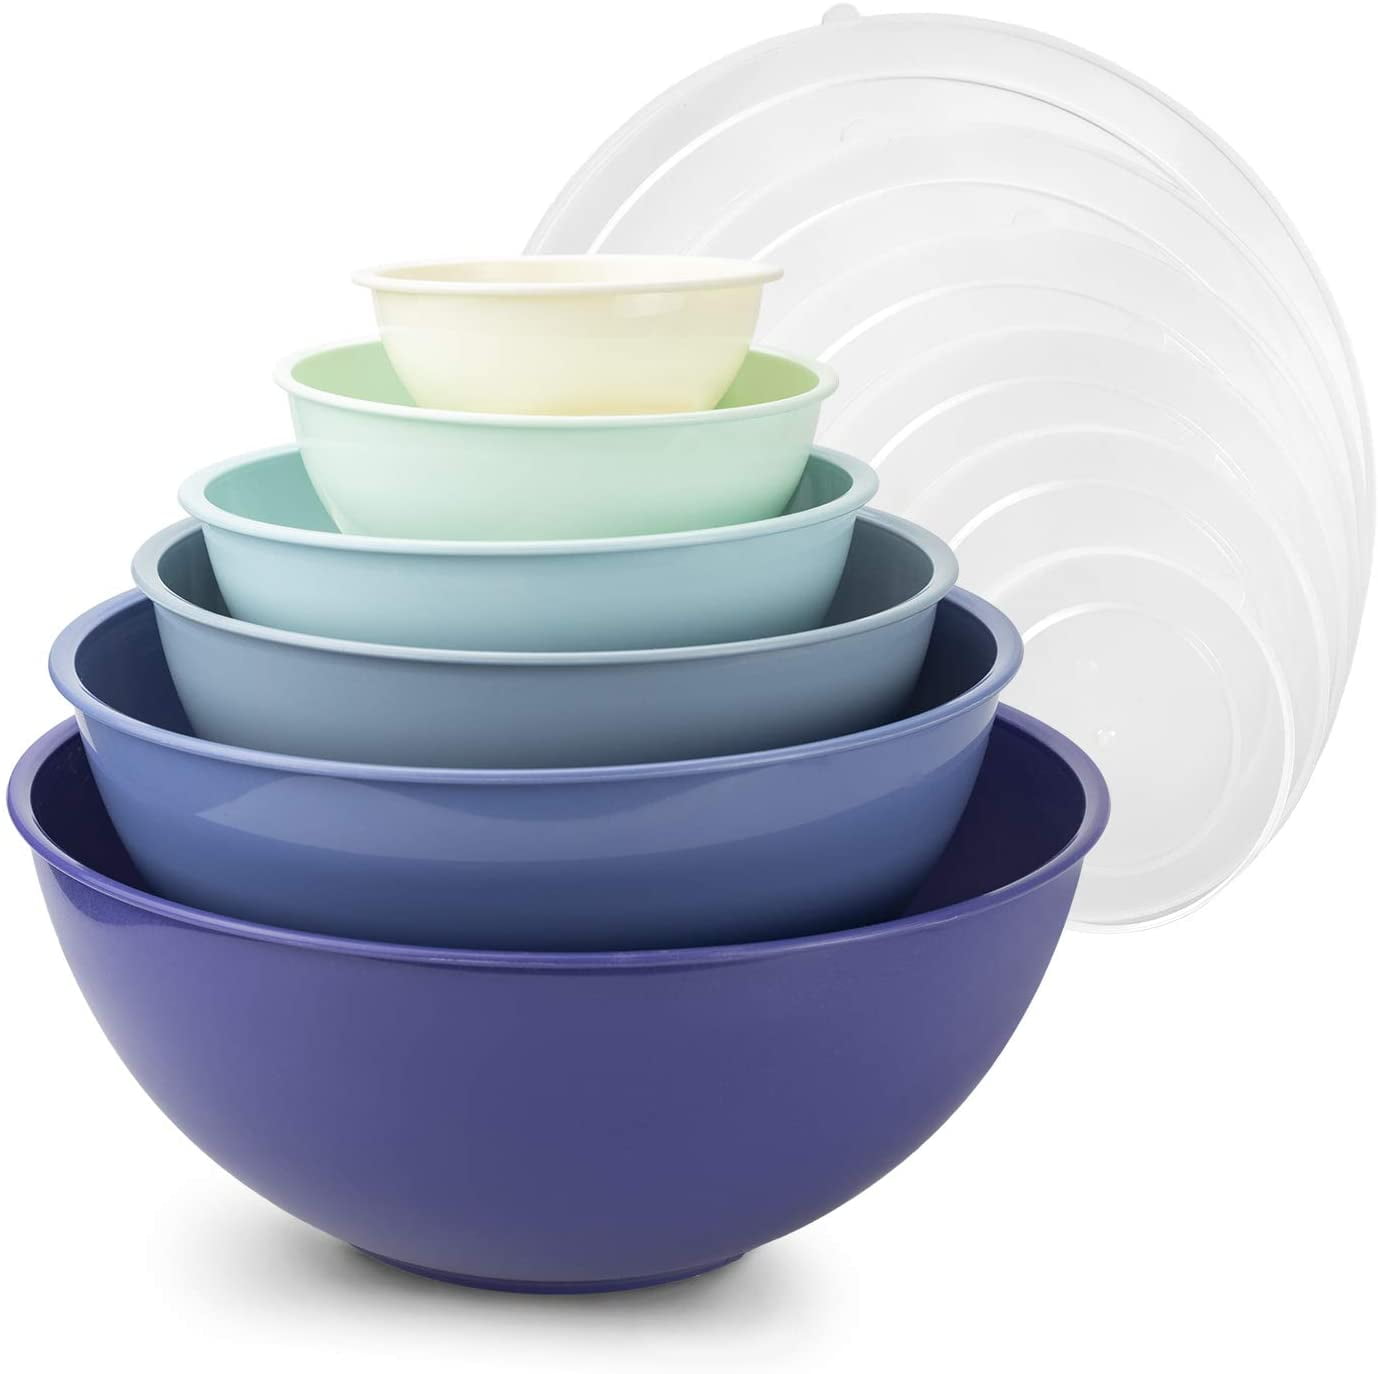 Cook With Color cook with color prep bowls - wide mixing bowls nesting  plastic meal prep bowl set with lids - small bowls food containers in